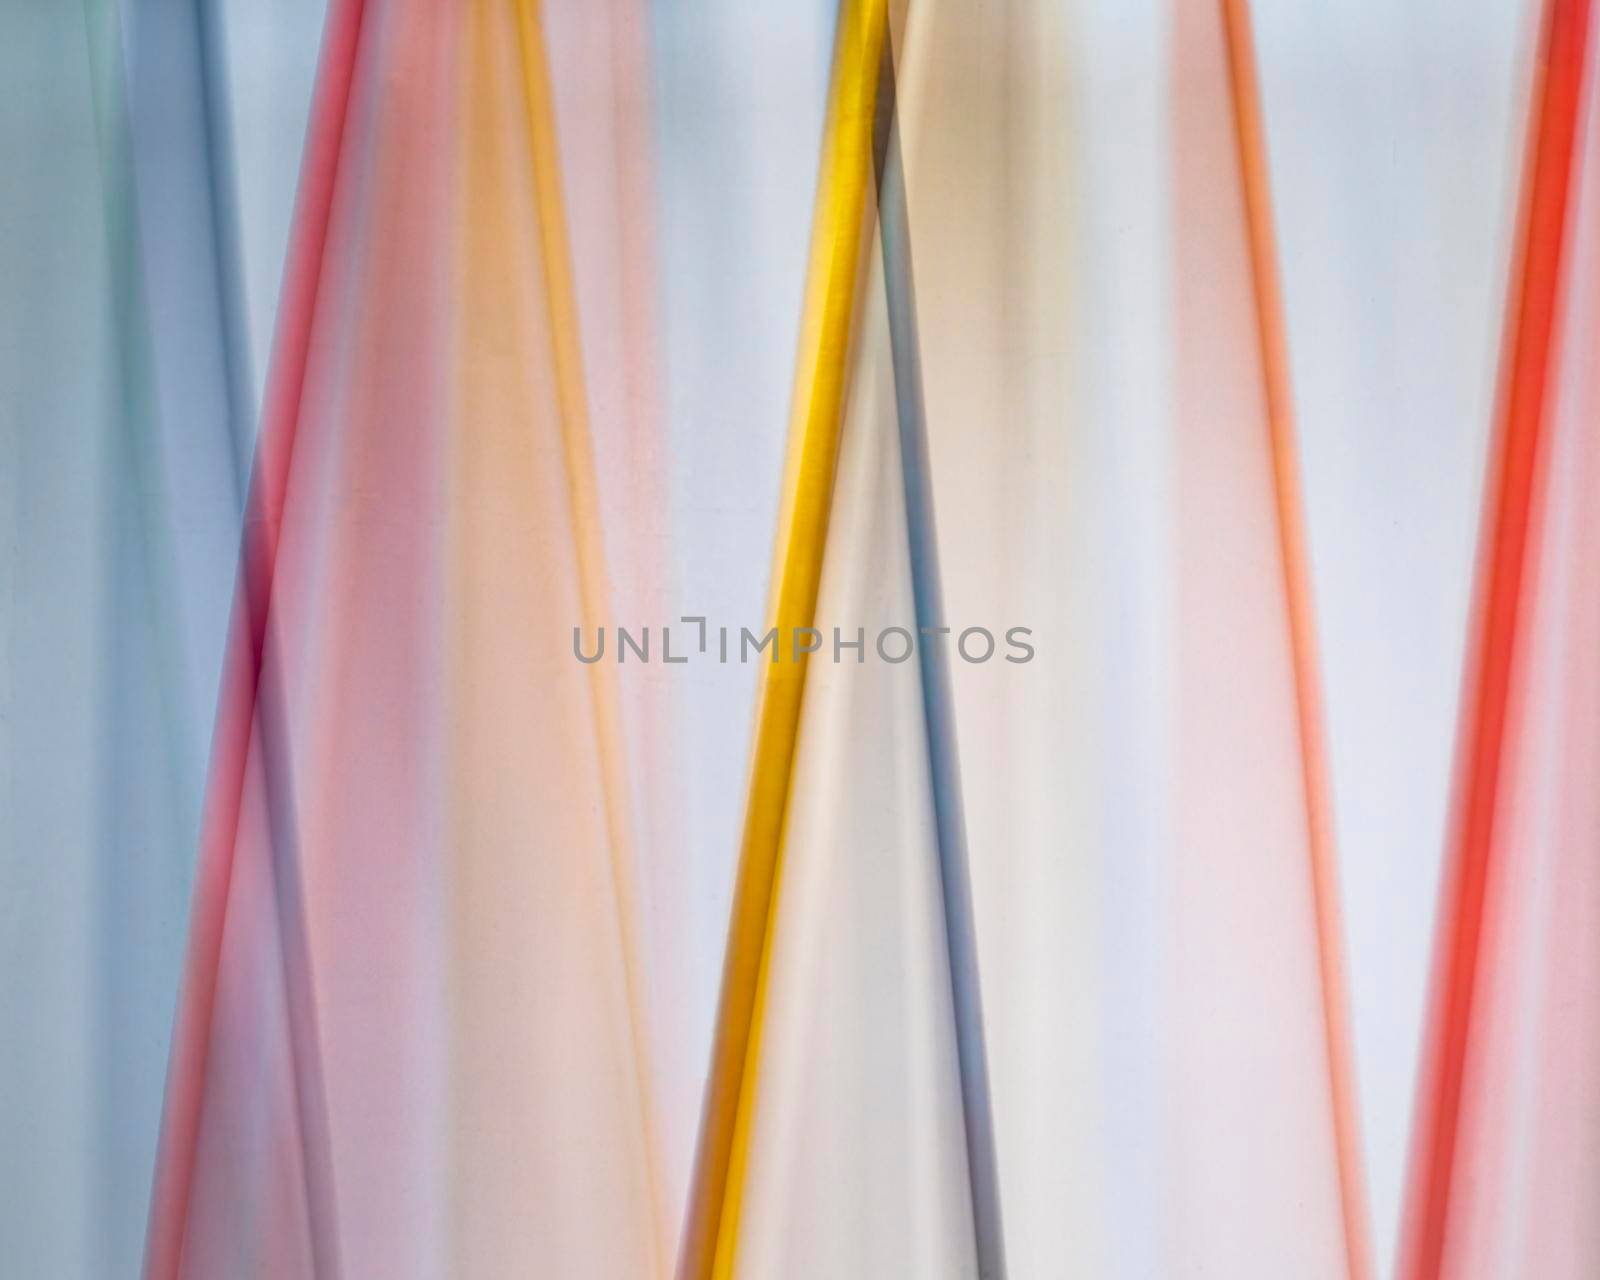 Colored Dowels In Motion by CharlieFloyd